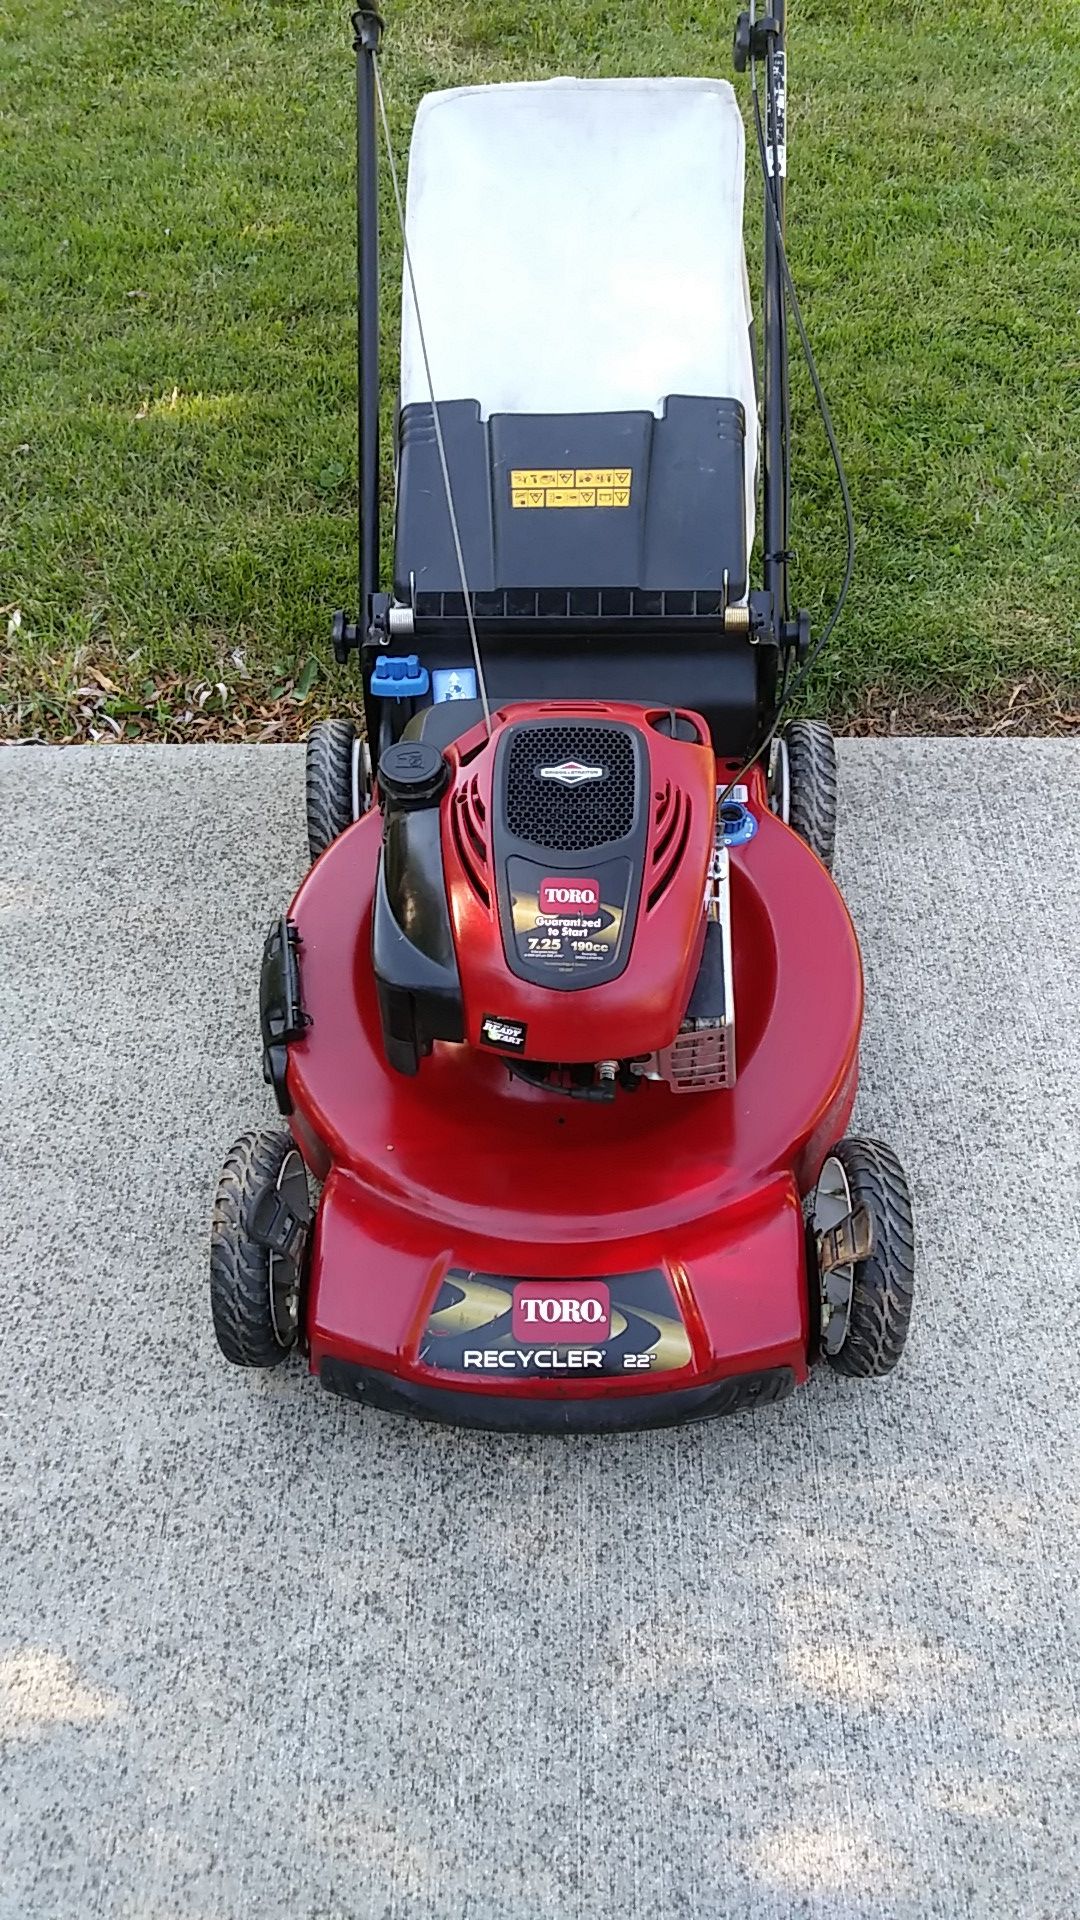 Toro 190cc self propelled lawn mower with a bag and personal pace